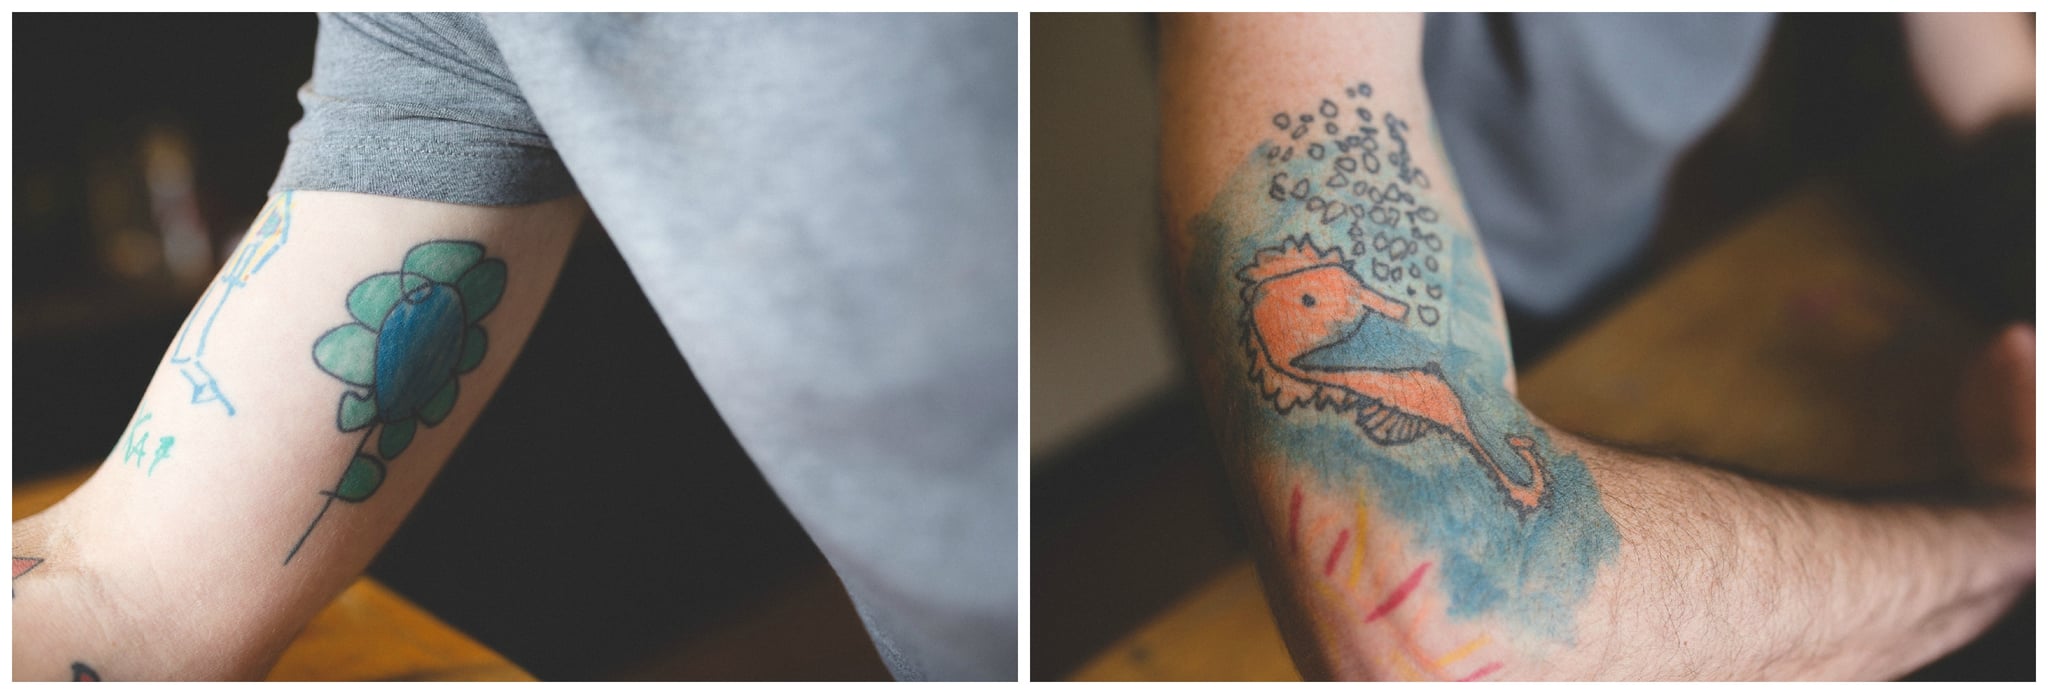 Father Gets a Tattoo Sleeve of His Son's Drawings | POPSUGAR Family